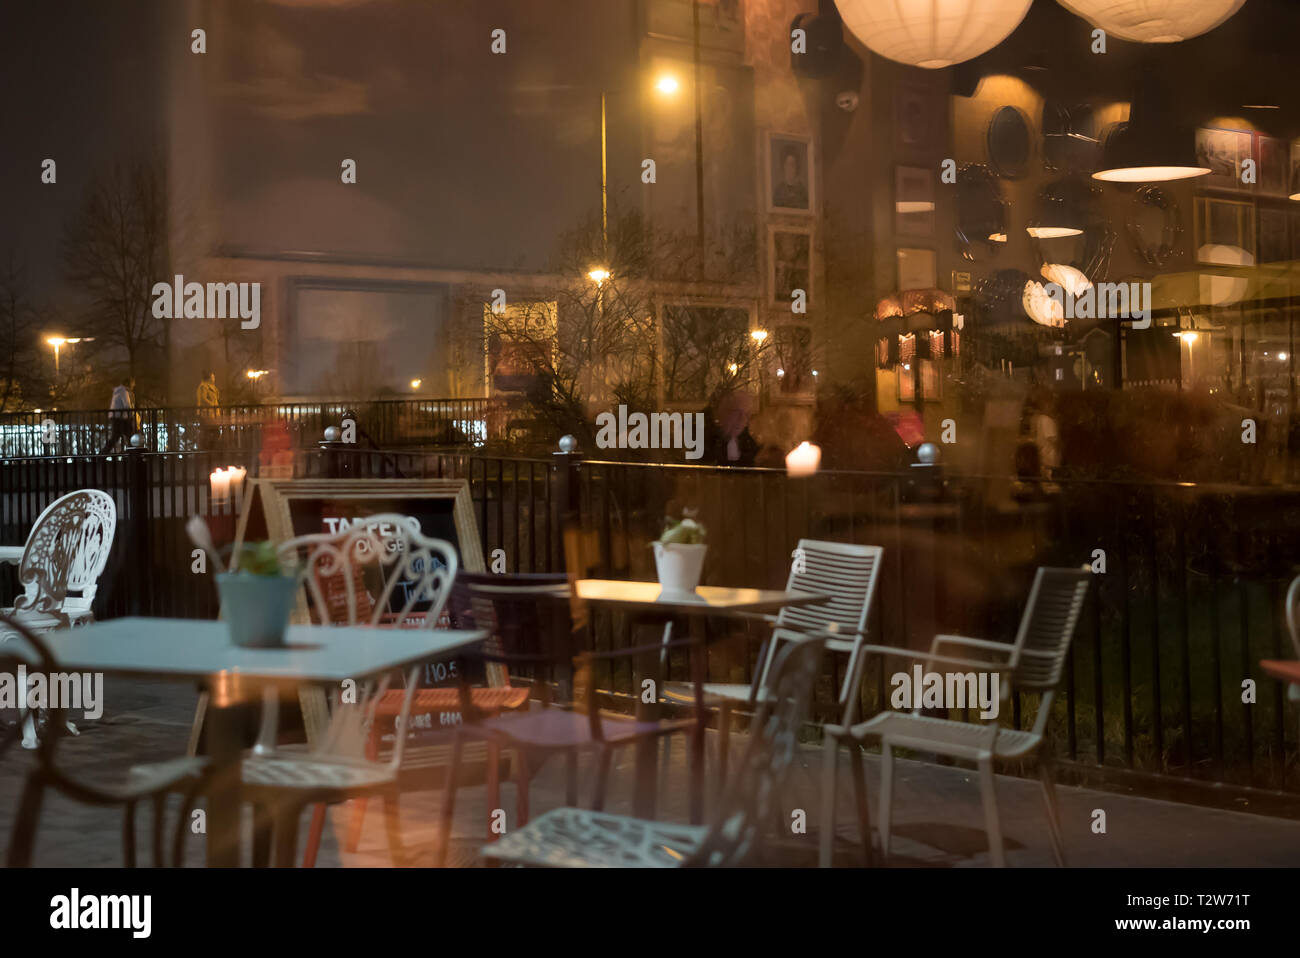 Interior view of trendy bar/bistro/cafe taken from outside in the street in evening. Outside chairs & tables visible in window reflection. Stock Photo